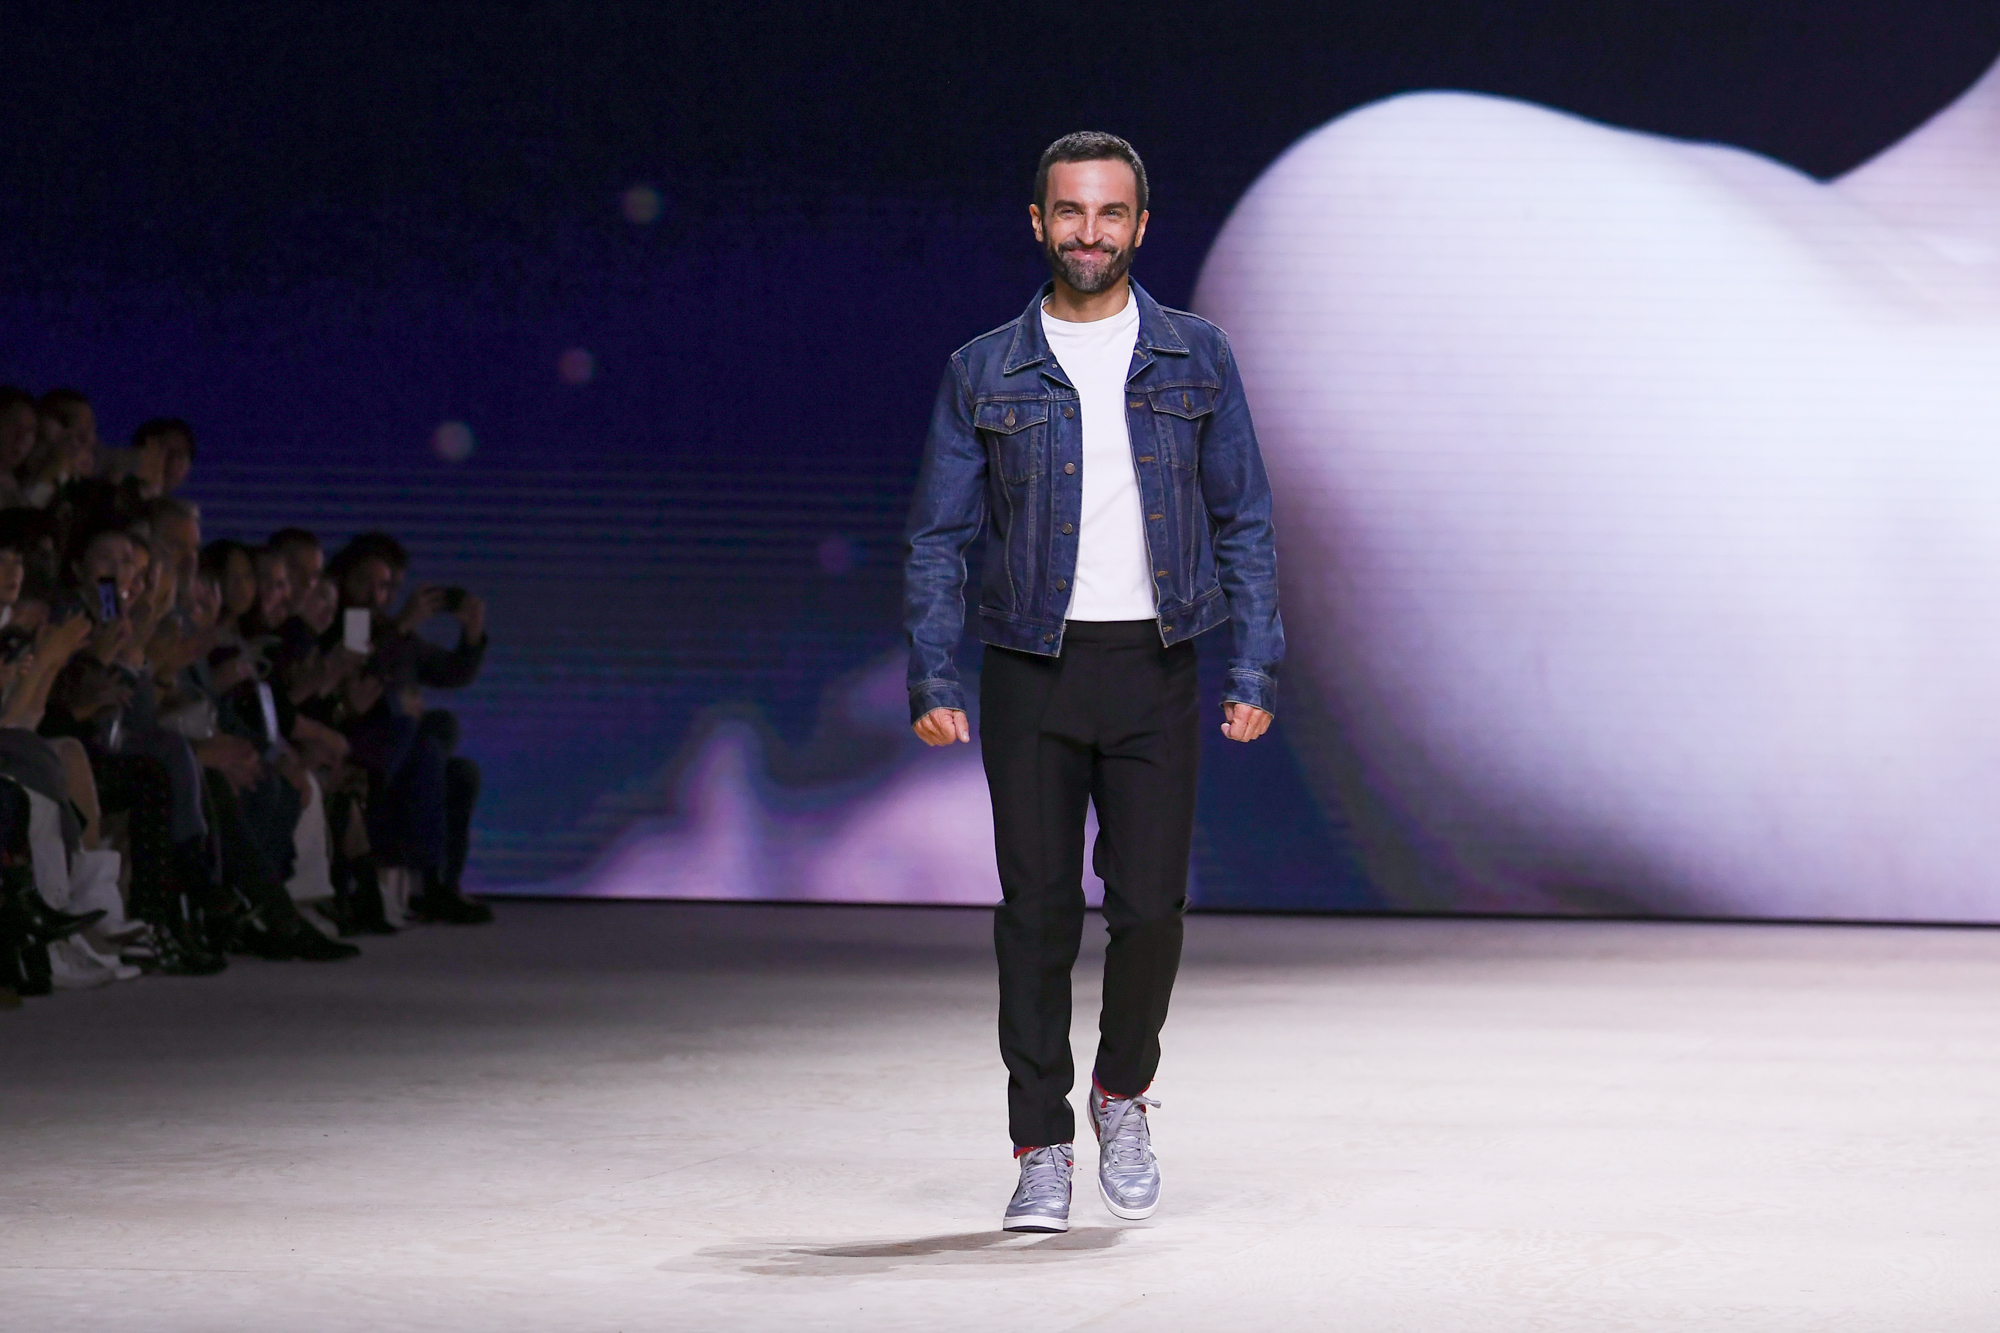 Nicolas Ghesquière walks the runway during the Louis Vuitton Womenswear Spring/Summer 2020 during Paris Fashion Week on Oct. 01, 2019 in Paris, France. (Dominique Charriau—WireImage/Getty Images)